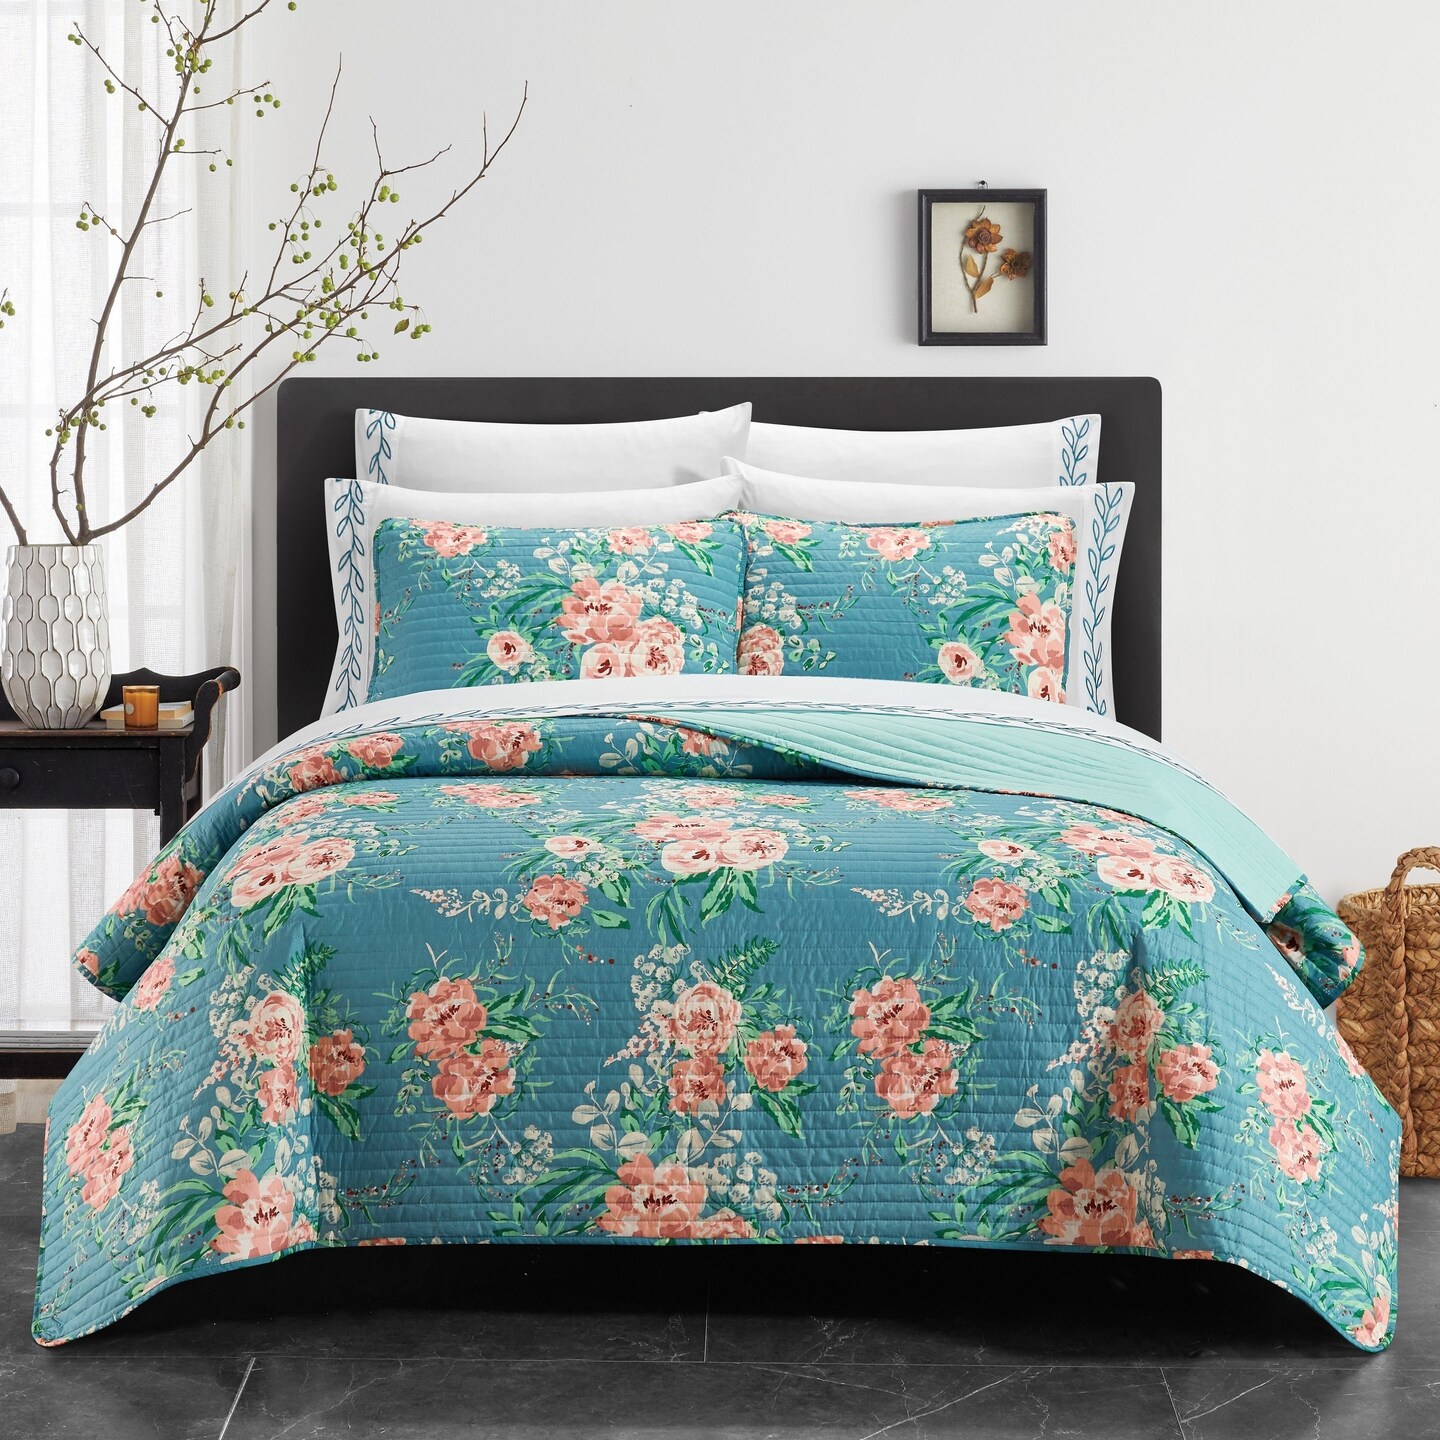 Chic Home Palm Spring 9 or 6 Piece Quilt Set Watercolor Floral Pattern Print Bed In A Bag